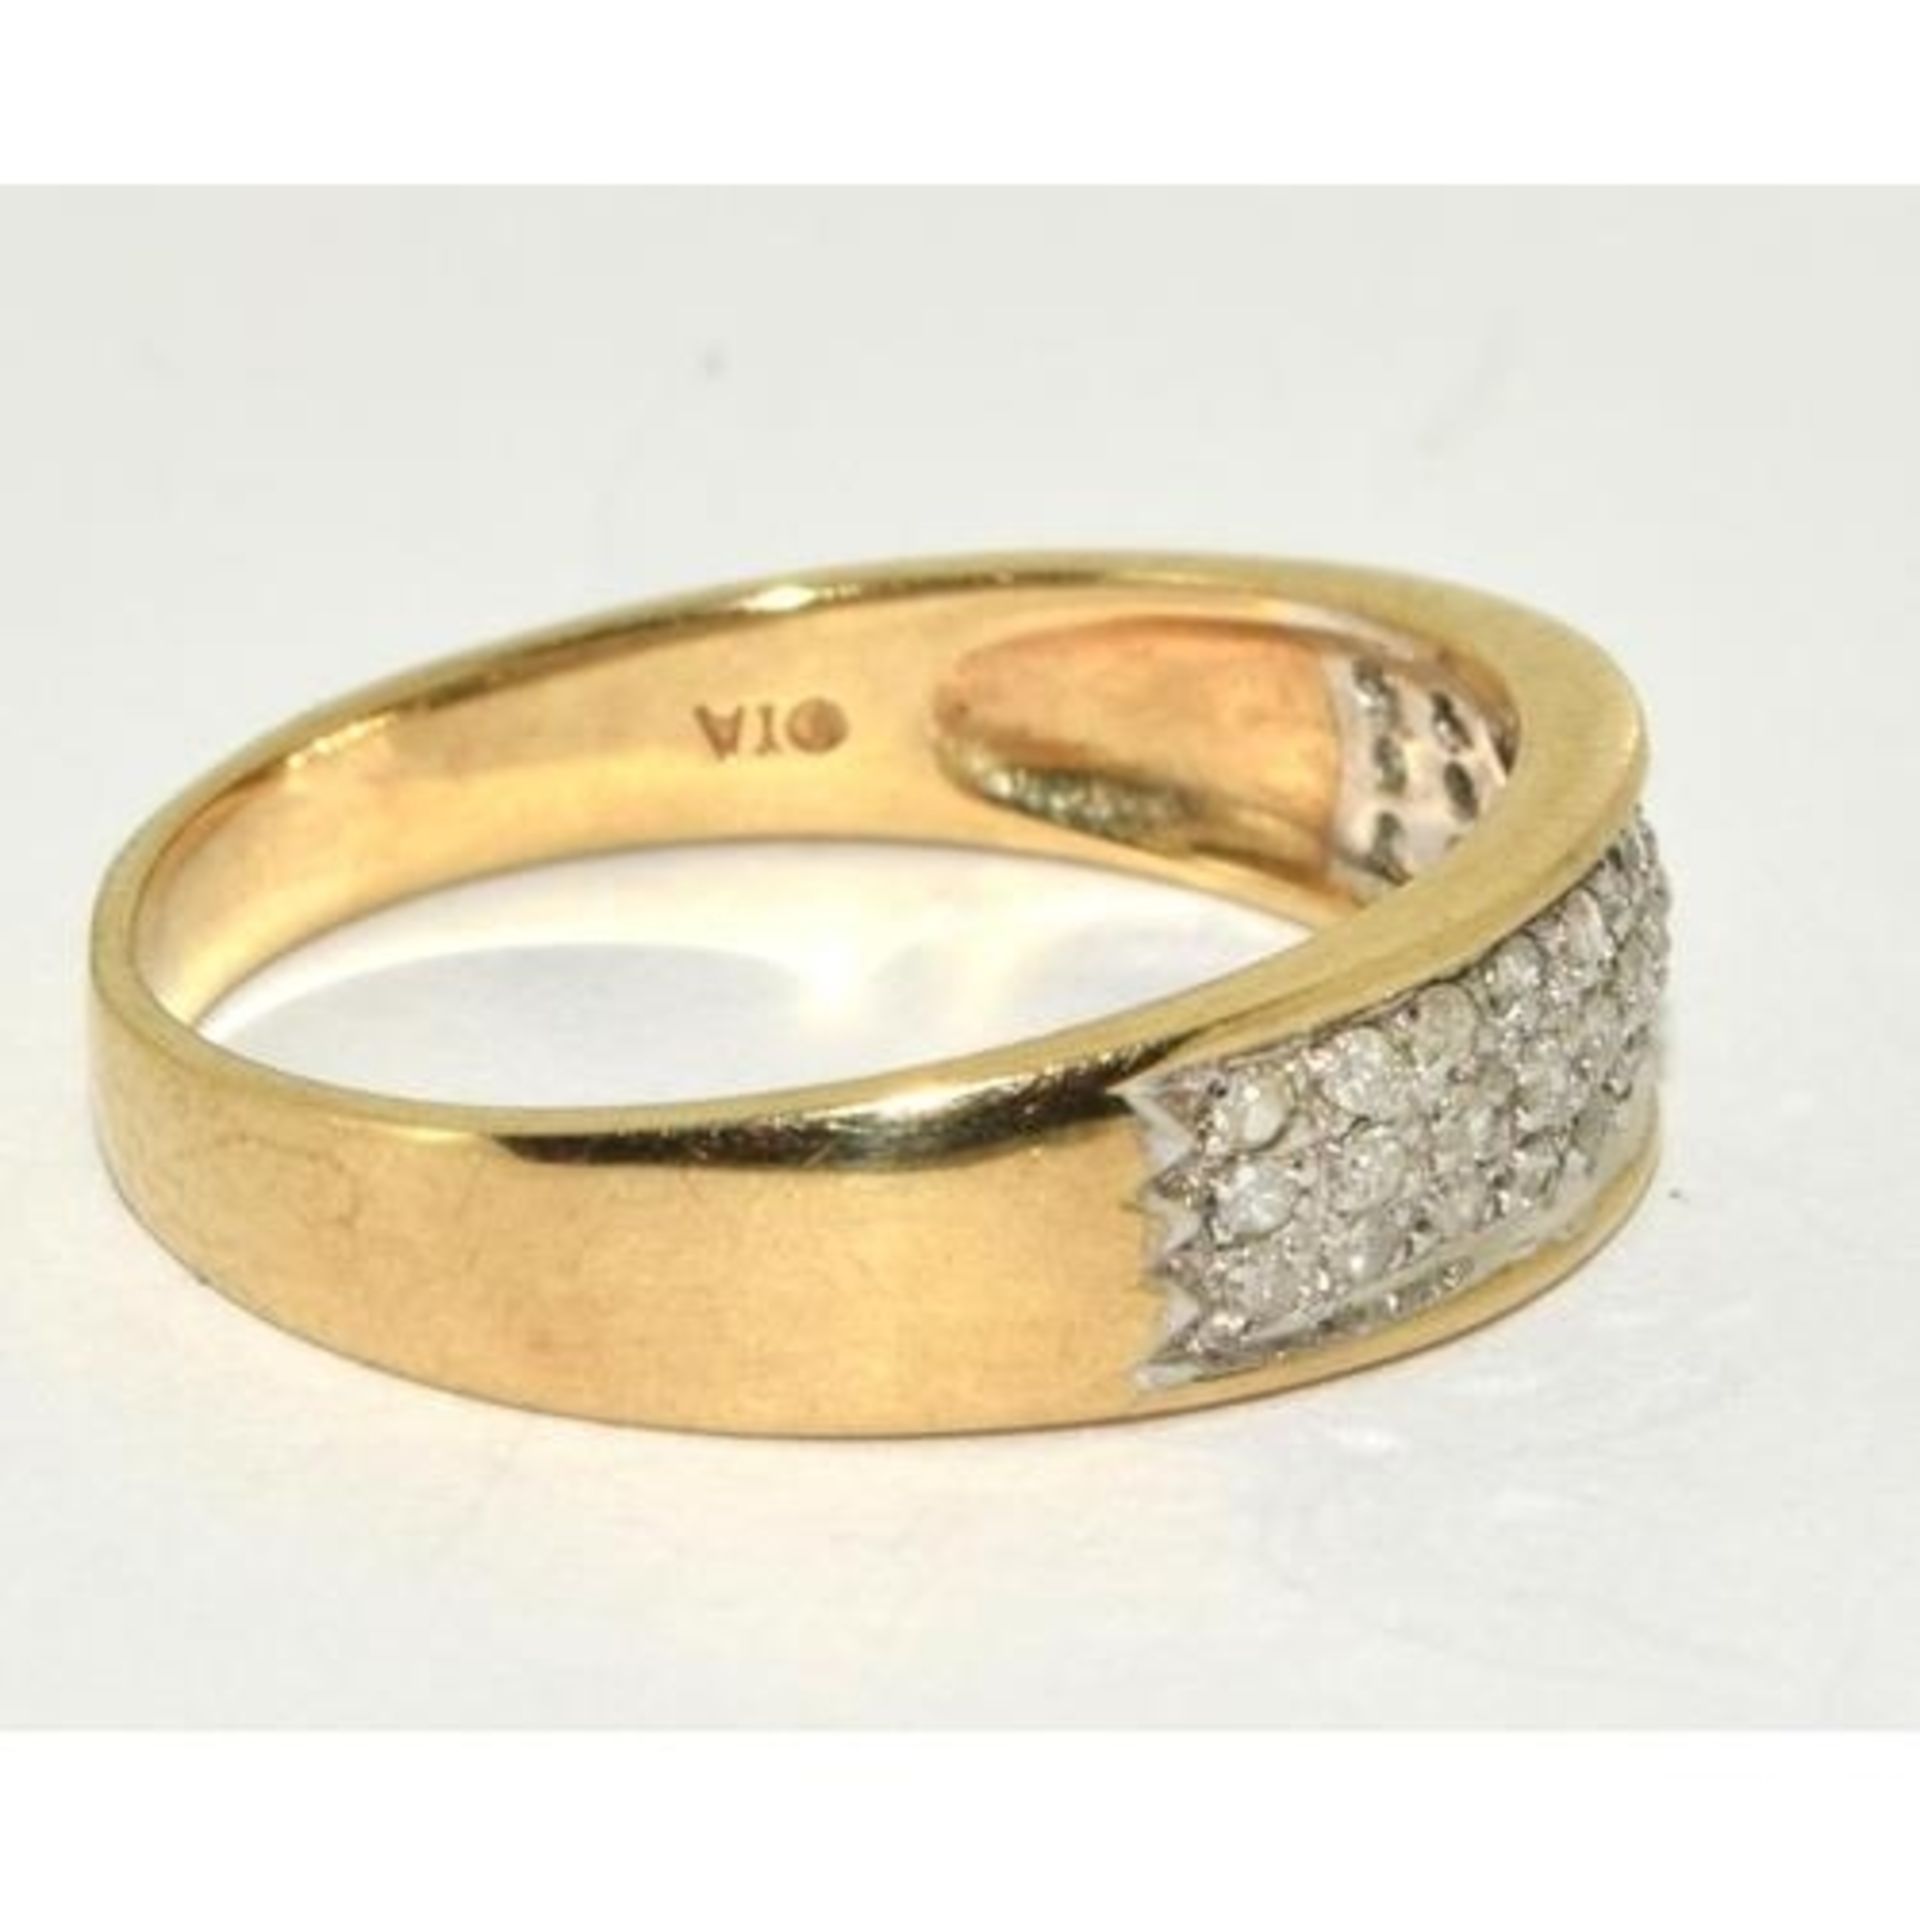 9ct gold ladies diamond ring hallmarked in the ring as 0.25 ct size T - Image 4 of 5